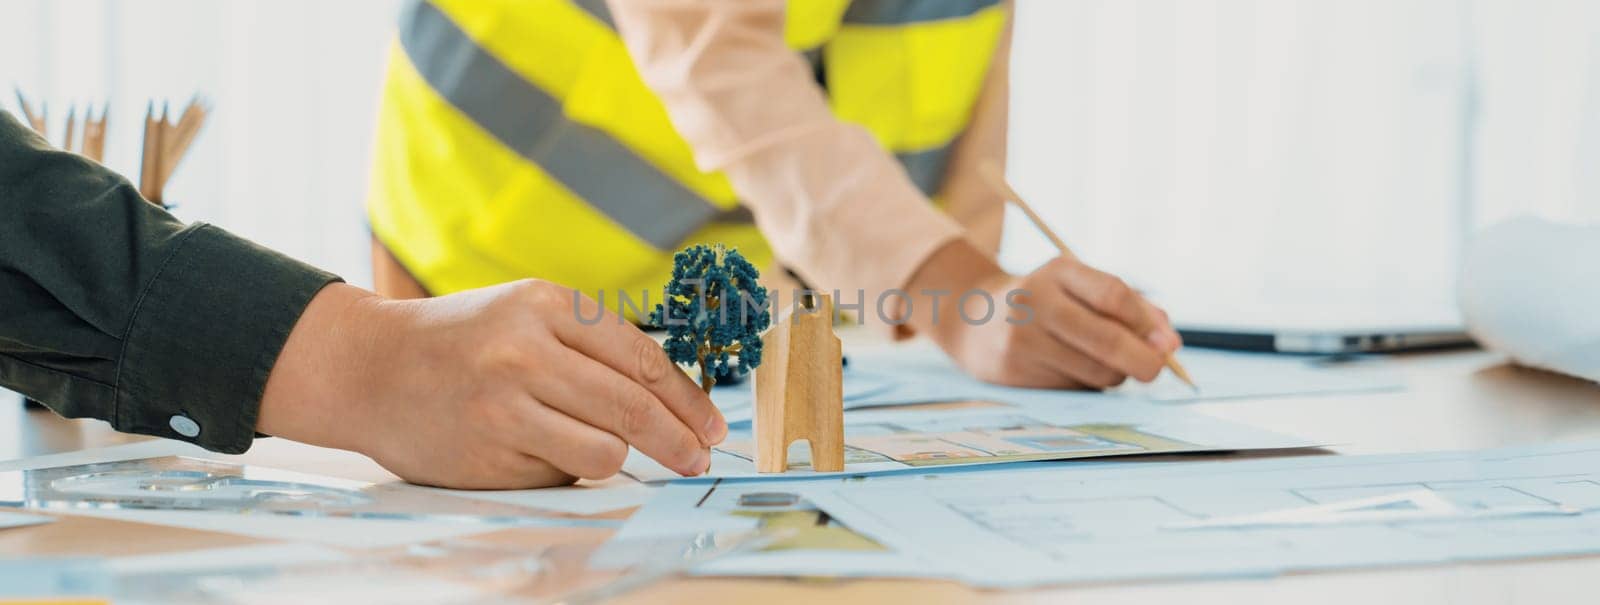 Professional architect and engineer collaborate to design eco-friendly house on meeting table with blueprint, wooden house block and tree model scatter around. Closeup. Delineation.